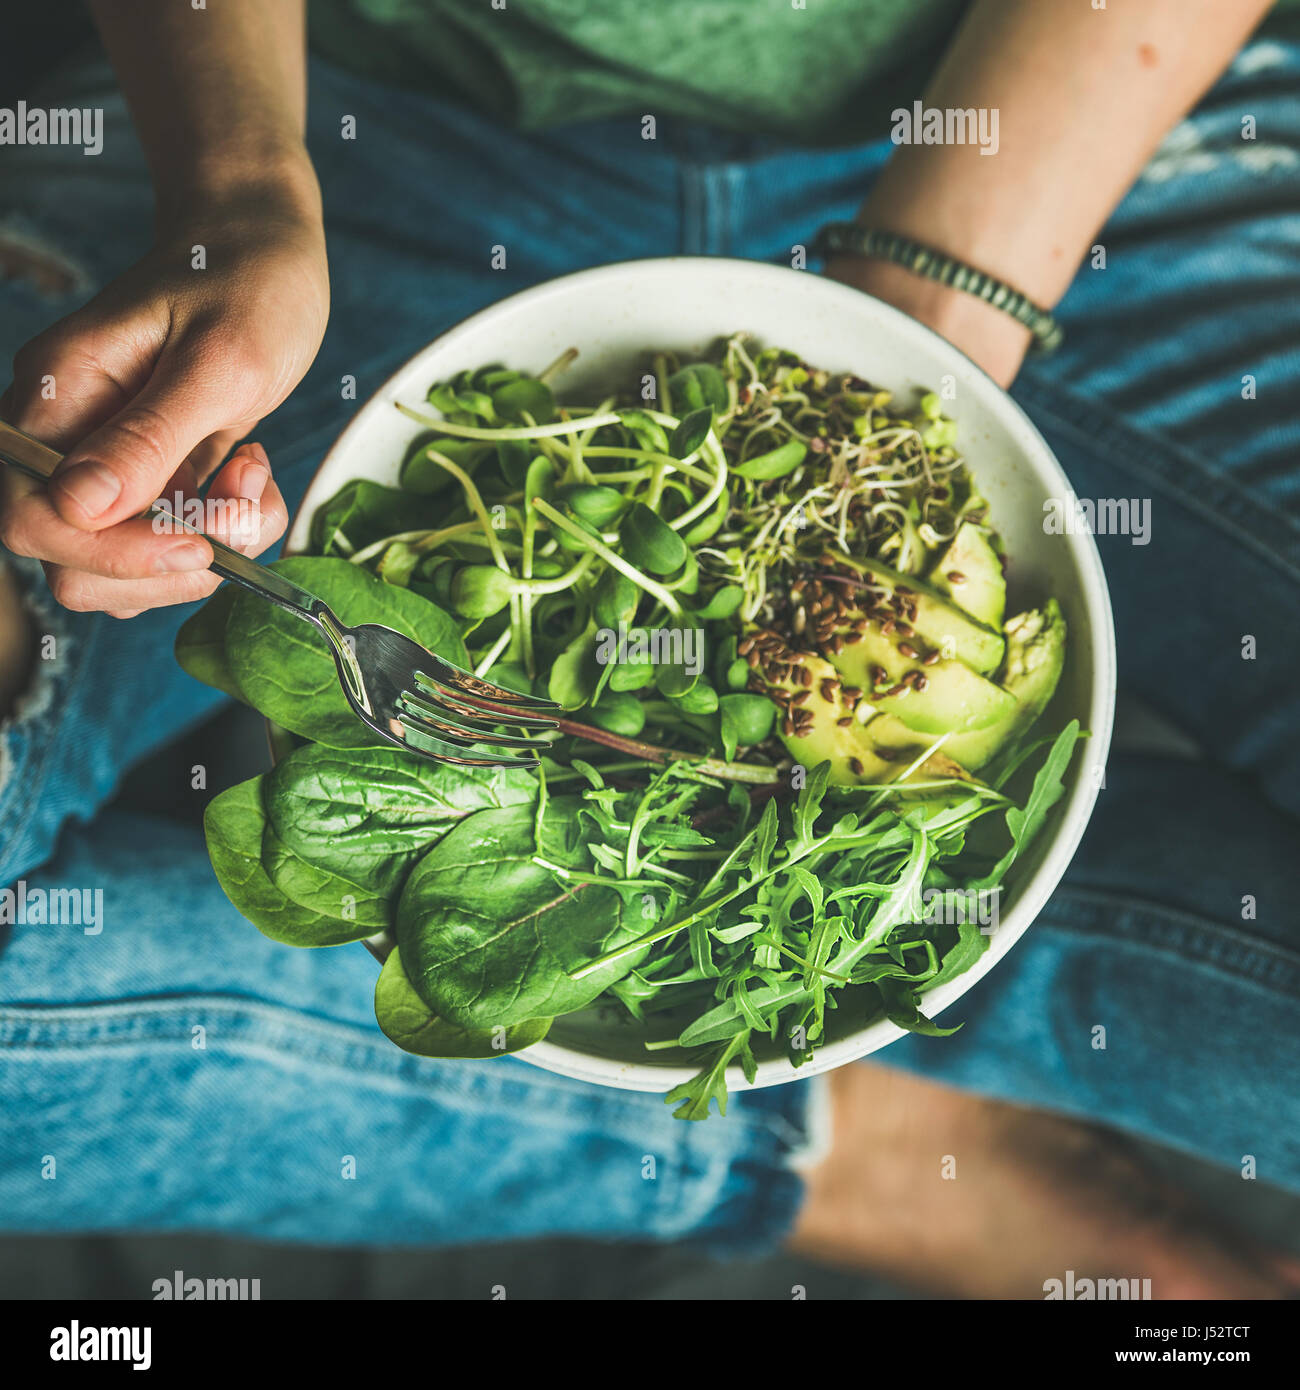 Visible High Resolution Stock Photography and Images - Alamy